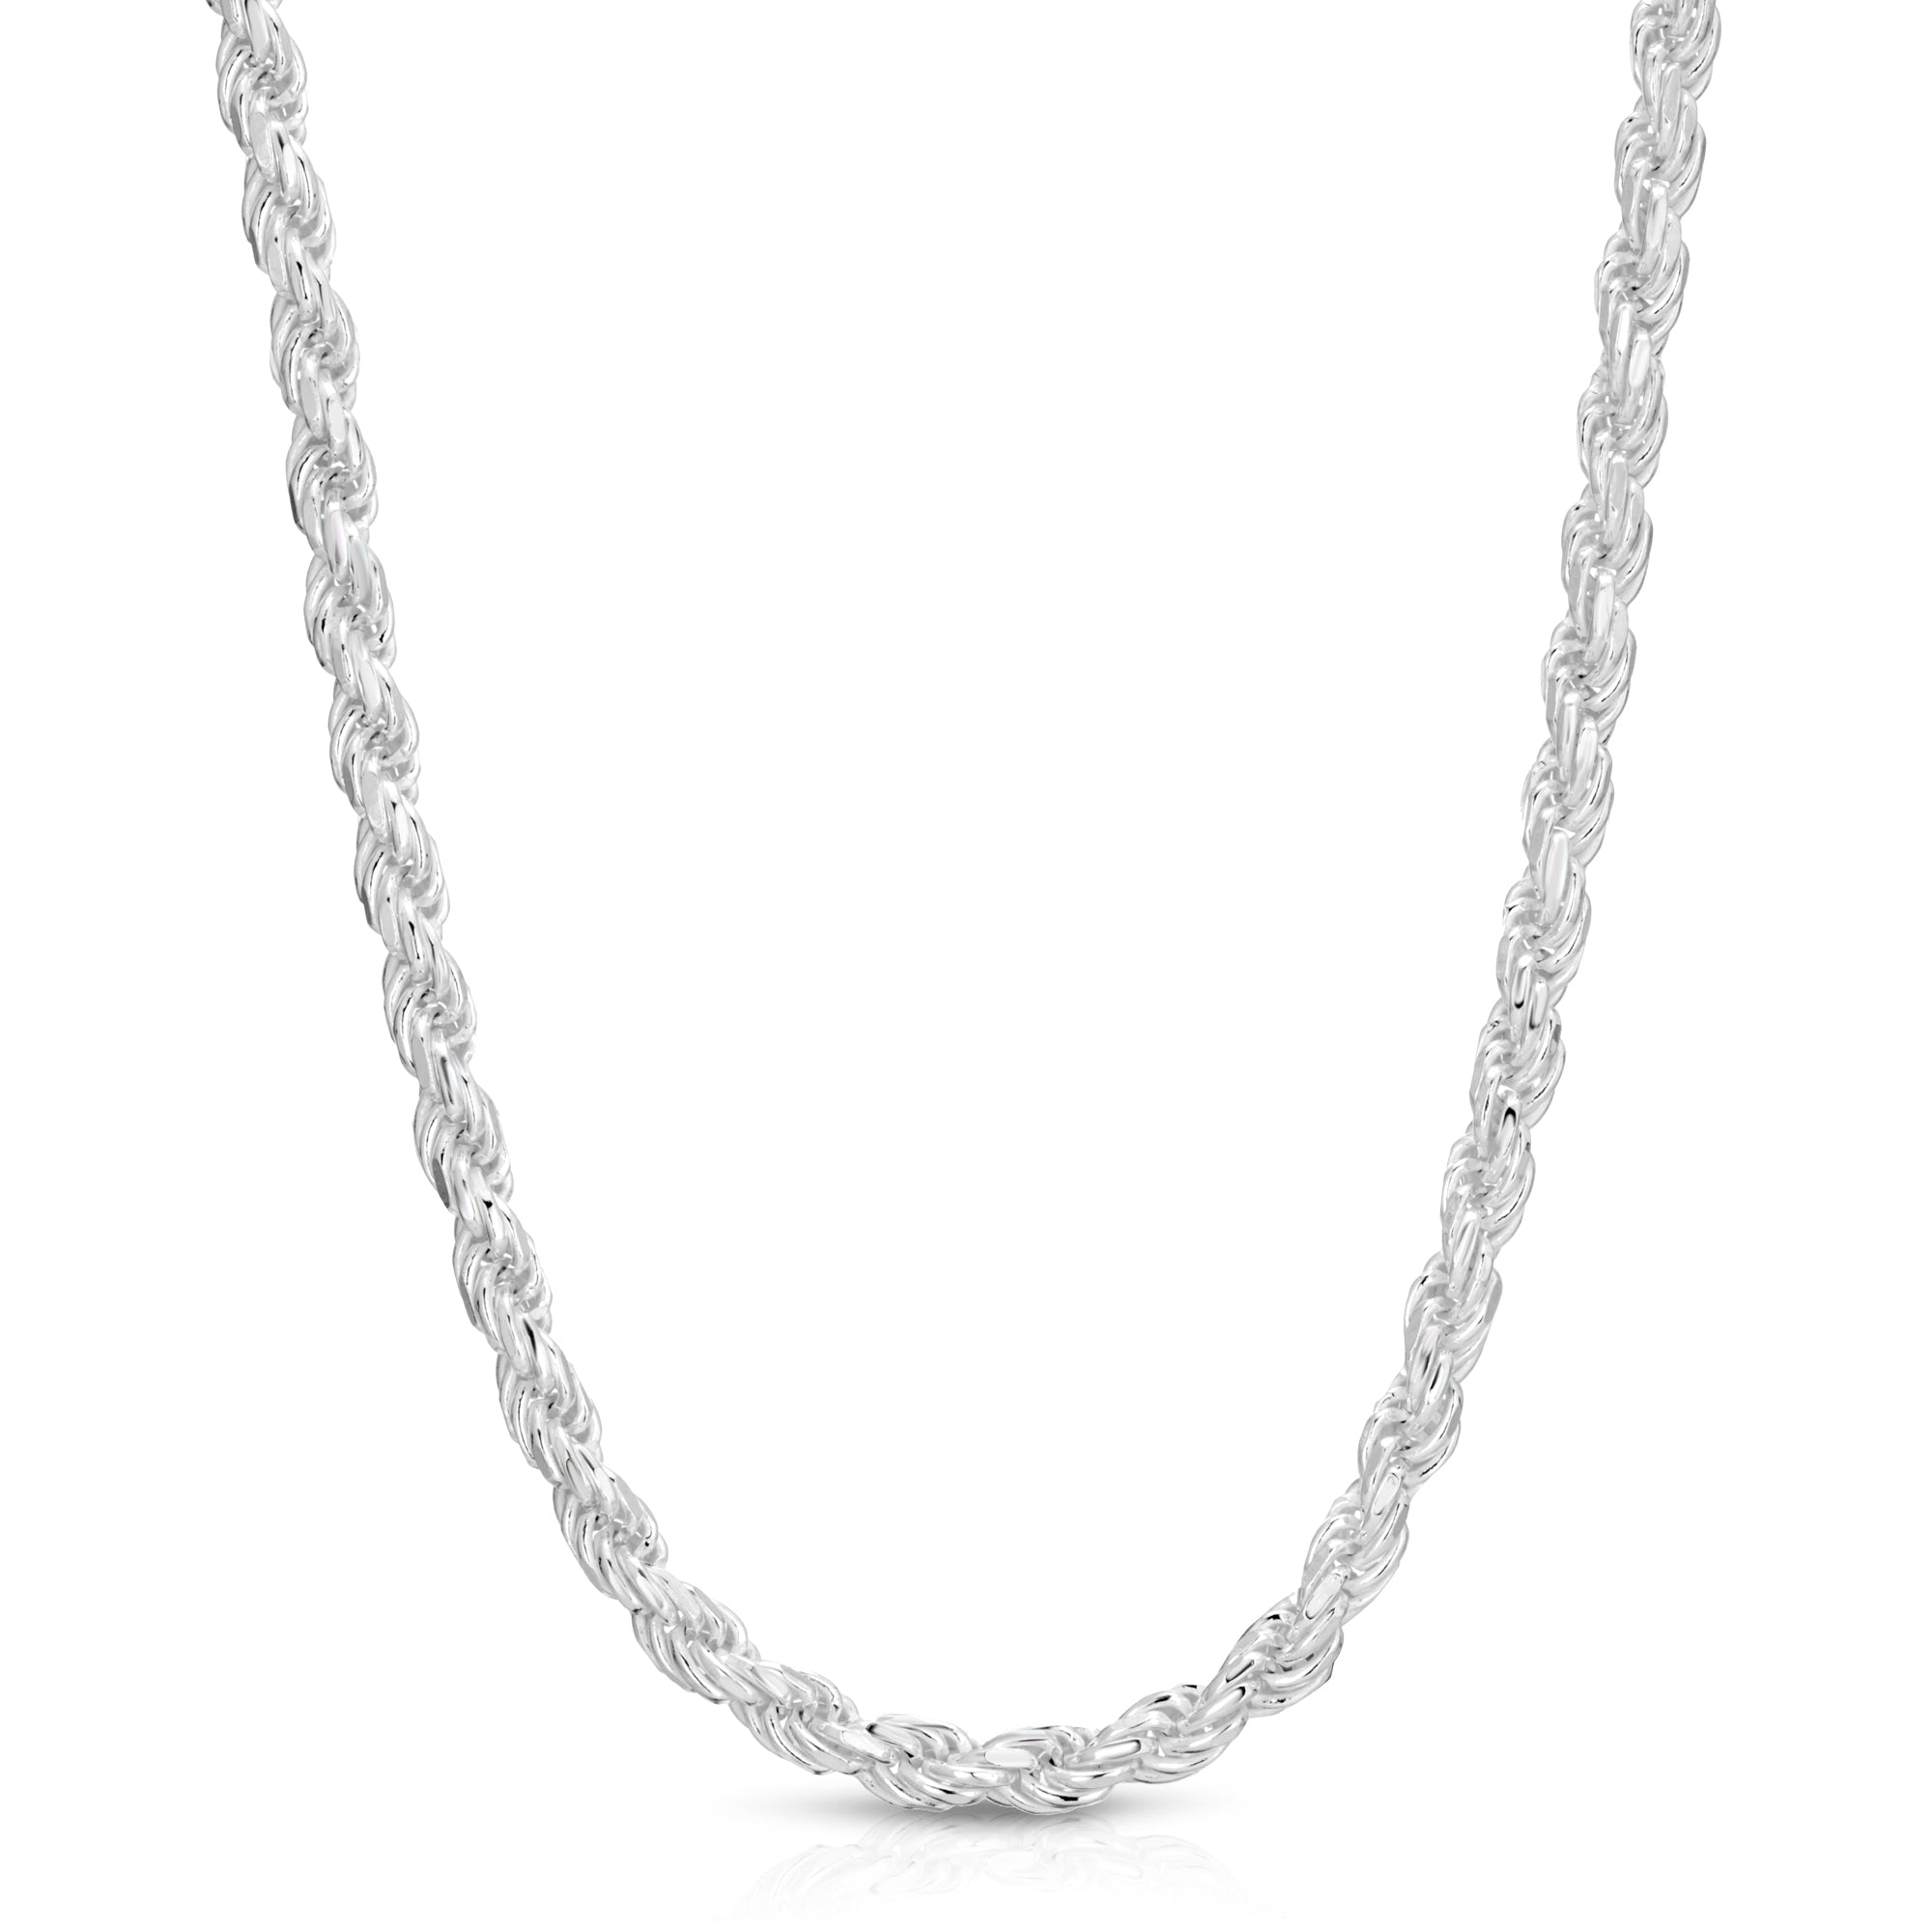 Sterling silver rope chains